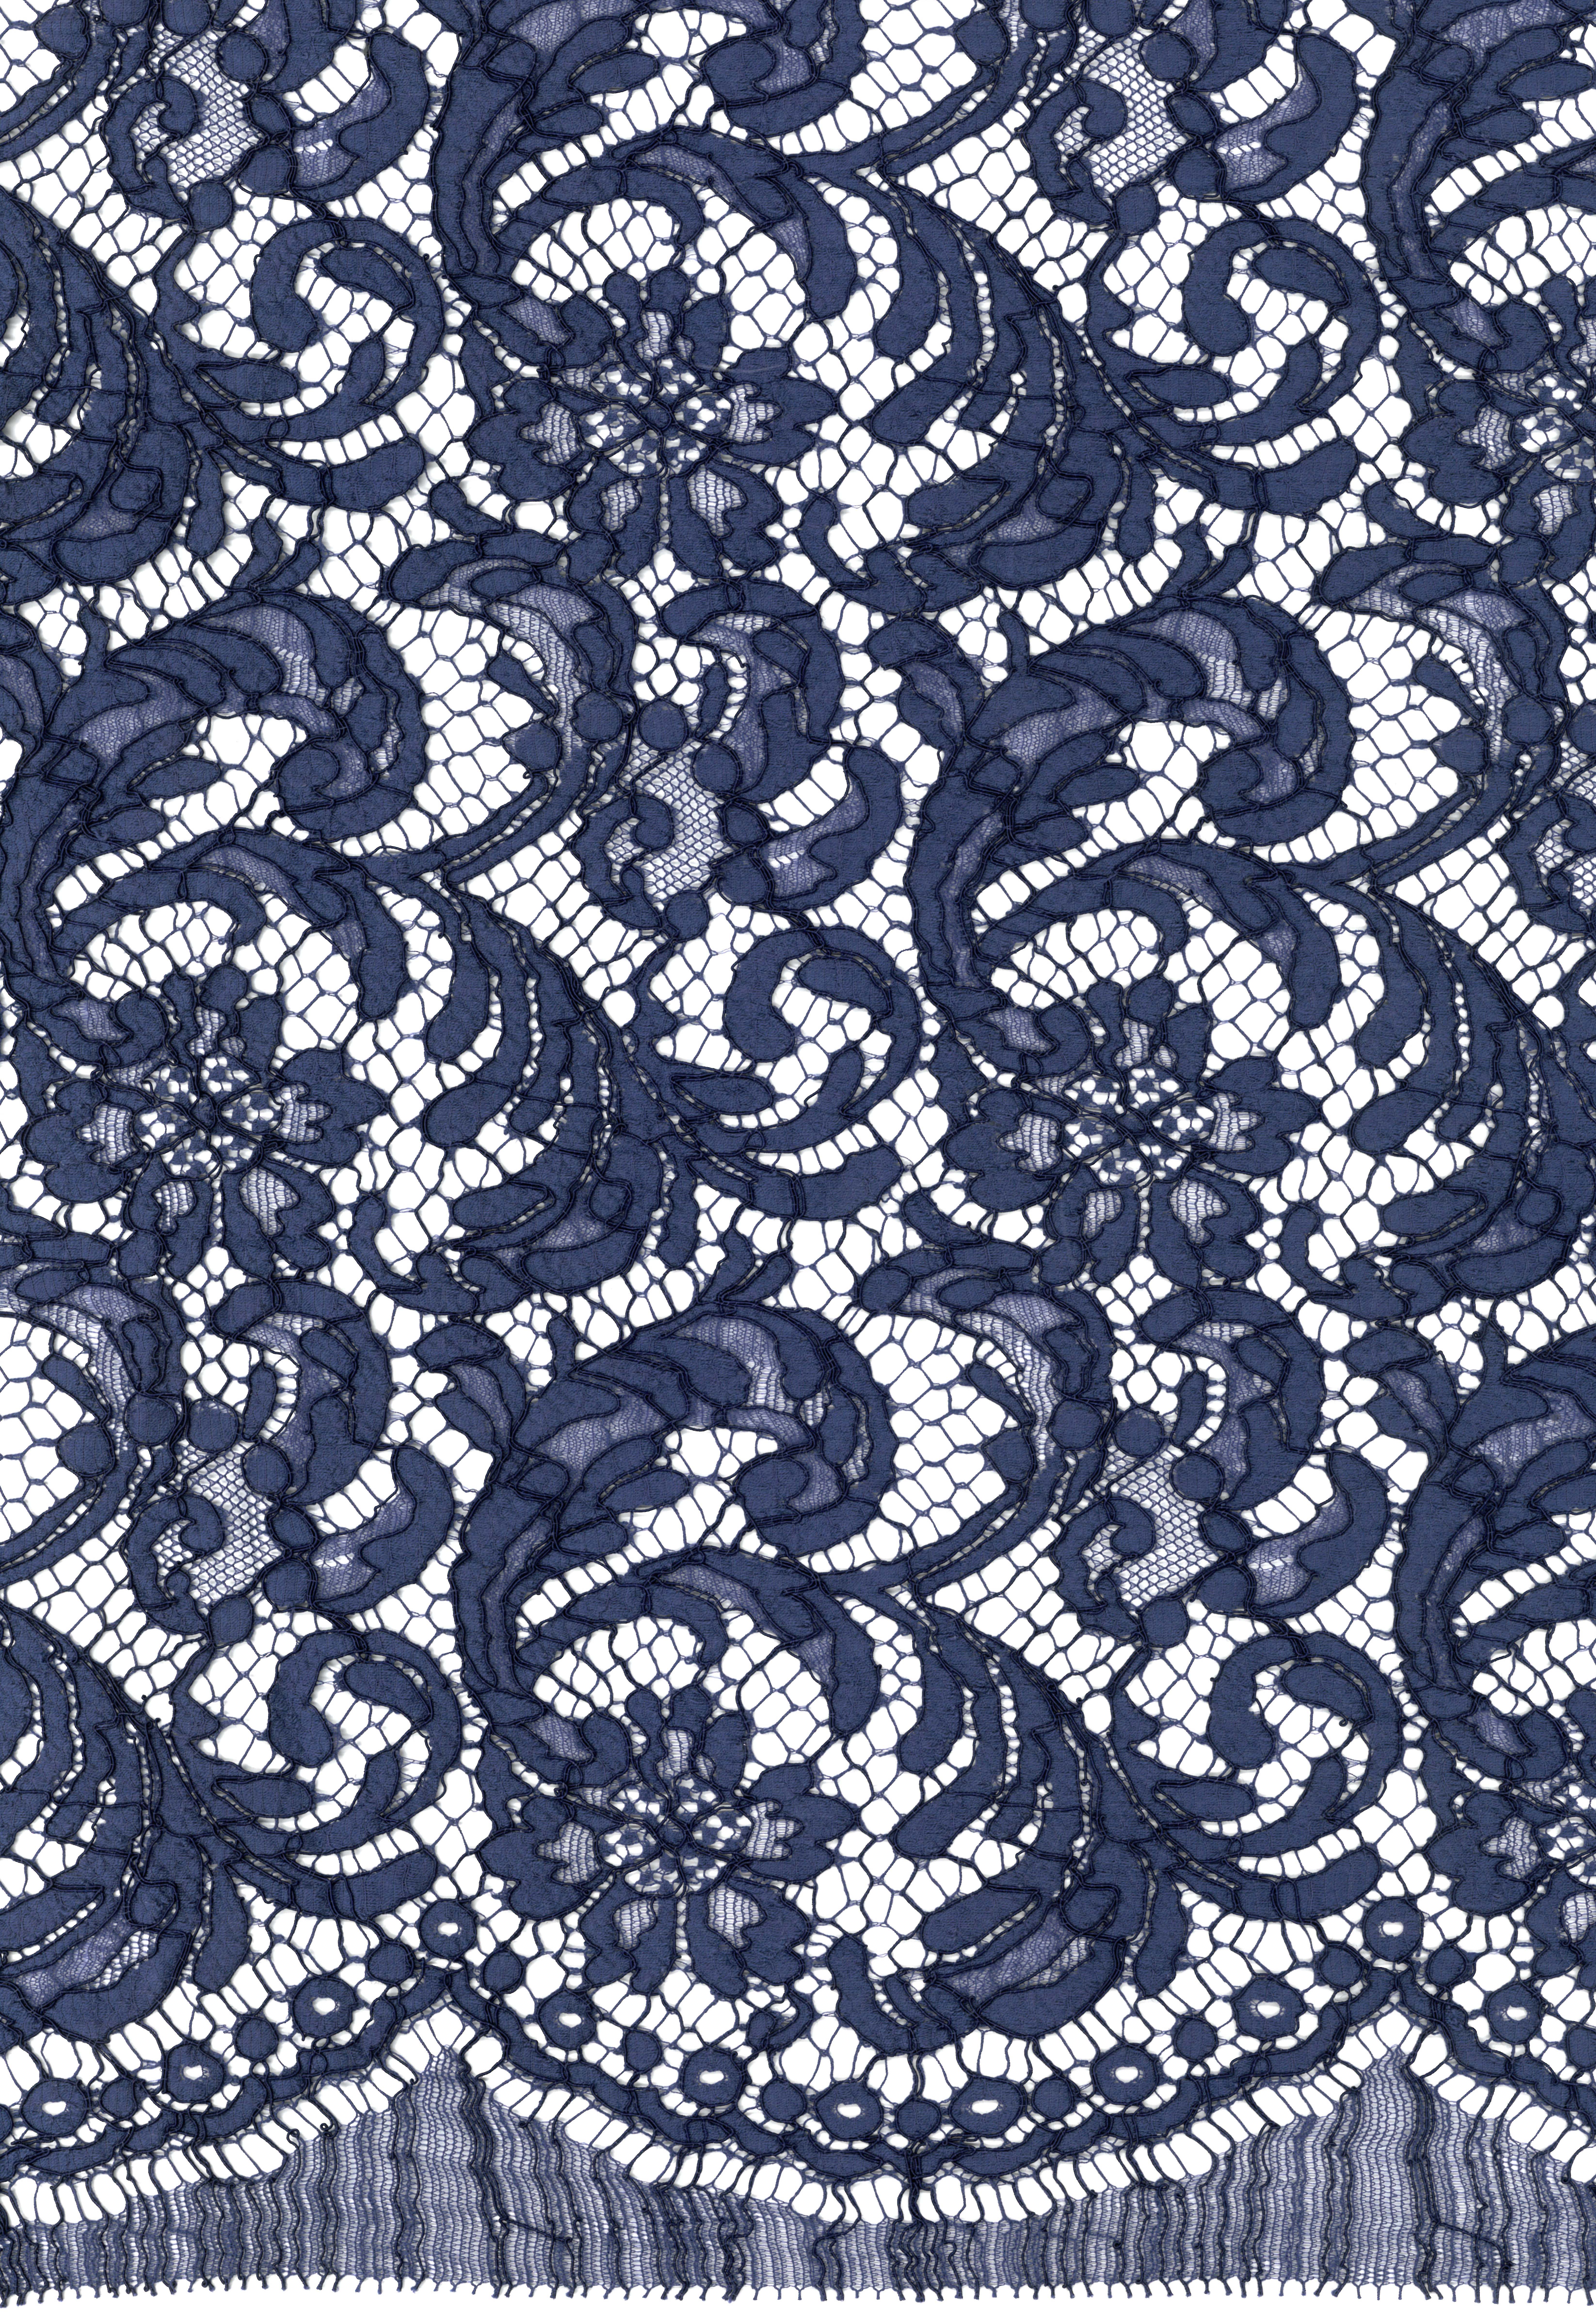 CORDED FRENCH LACE - ELECTRIC BLUE